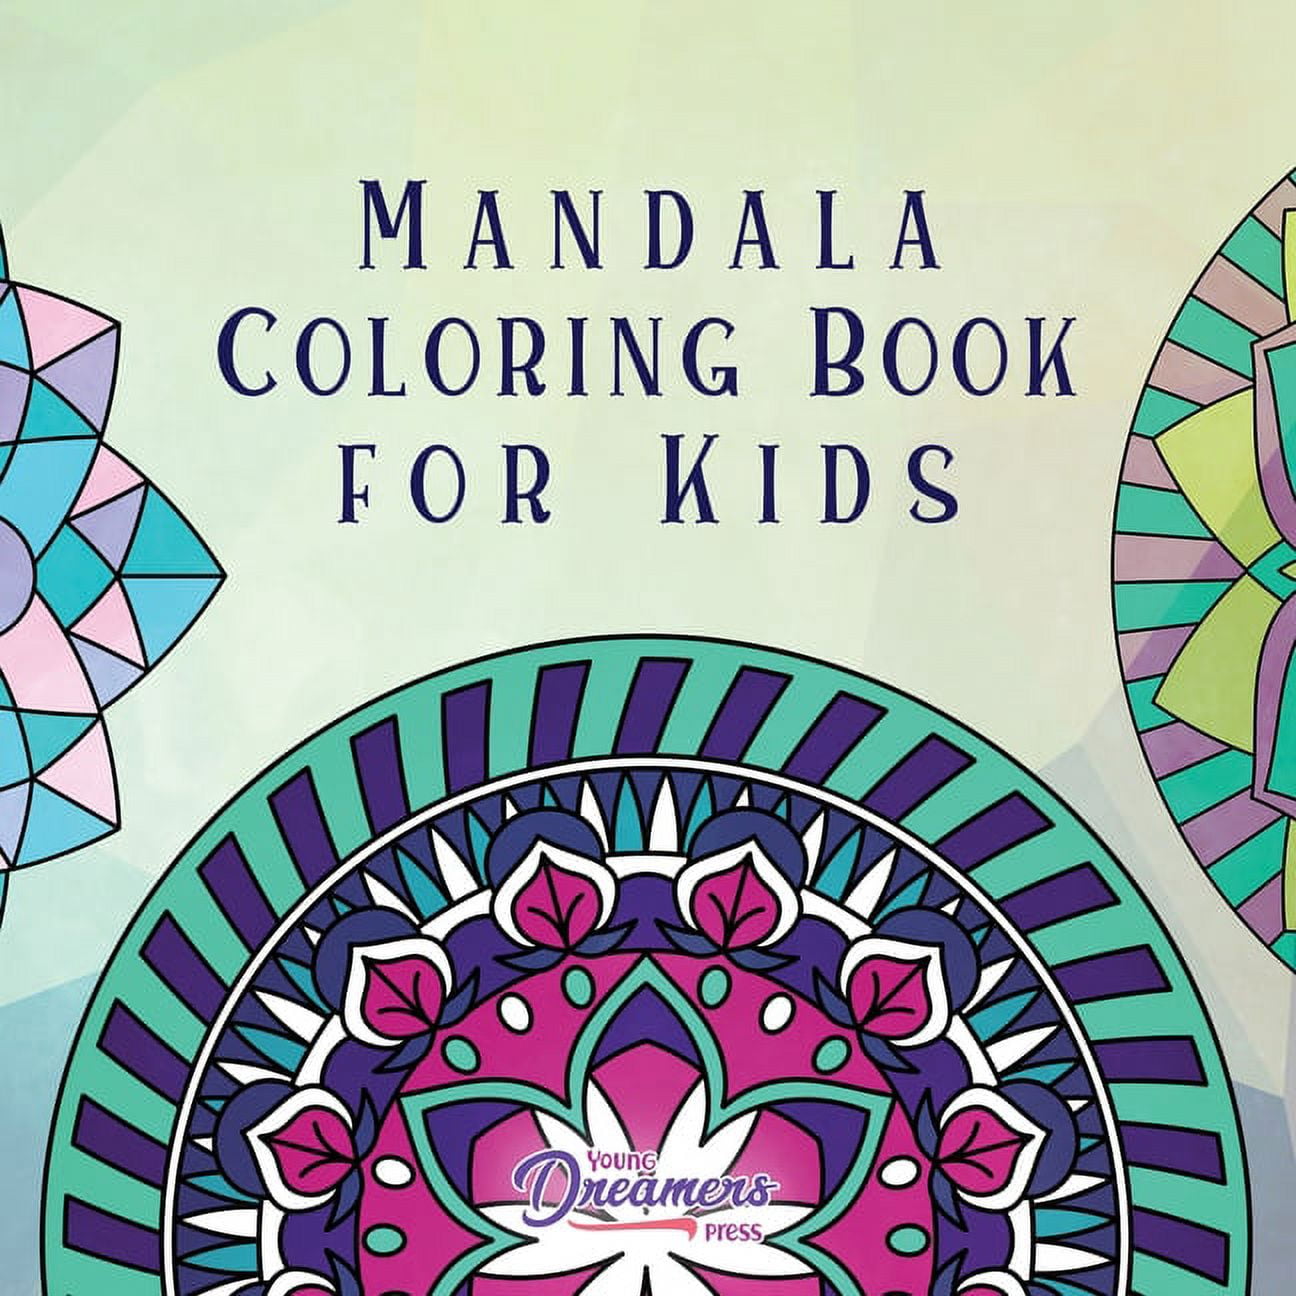 Childrens Coloring Book with Fun, Easy, and Relaxing Mandalas for